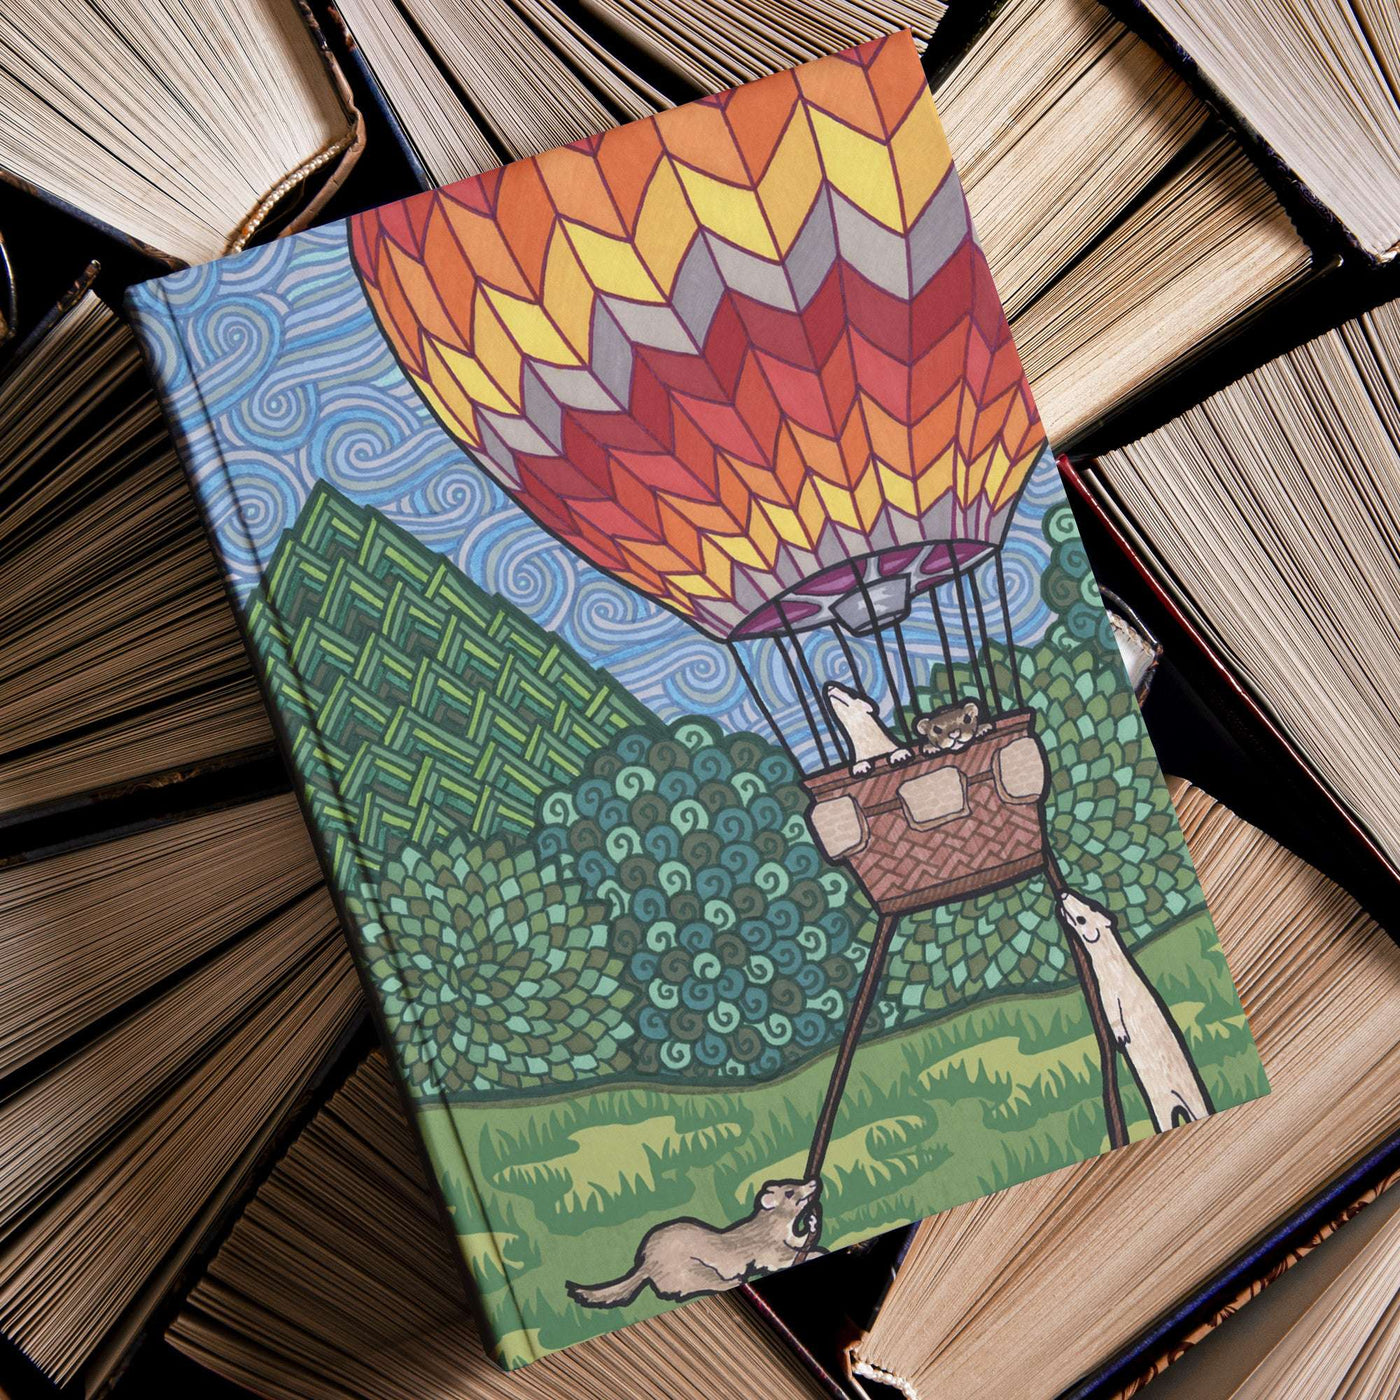 A Ferret Flight Journal with a hot air balloon and ferrets illustration on the cover, resting on a pile of old books.